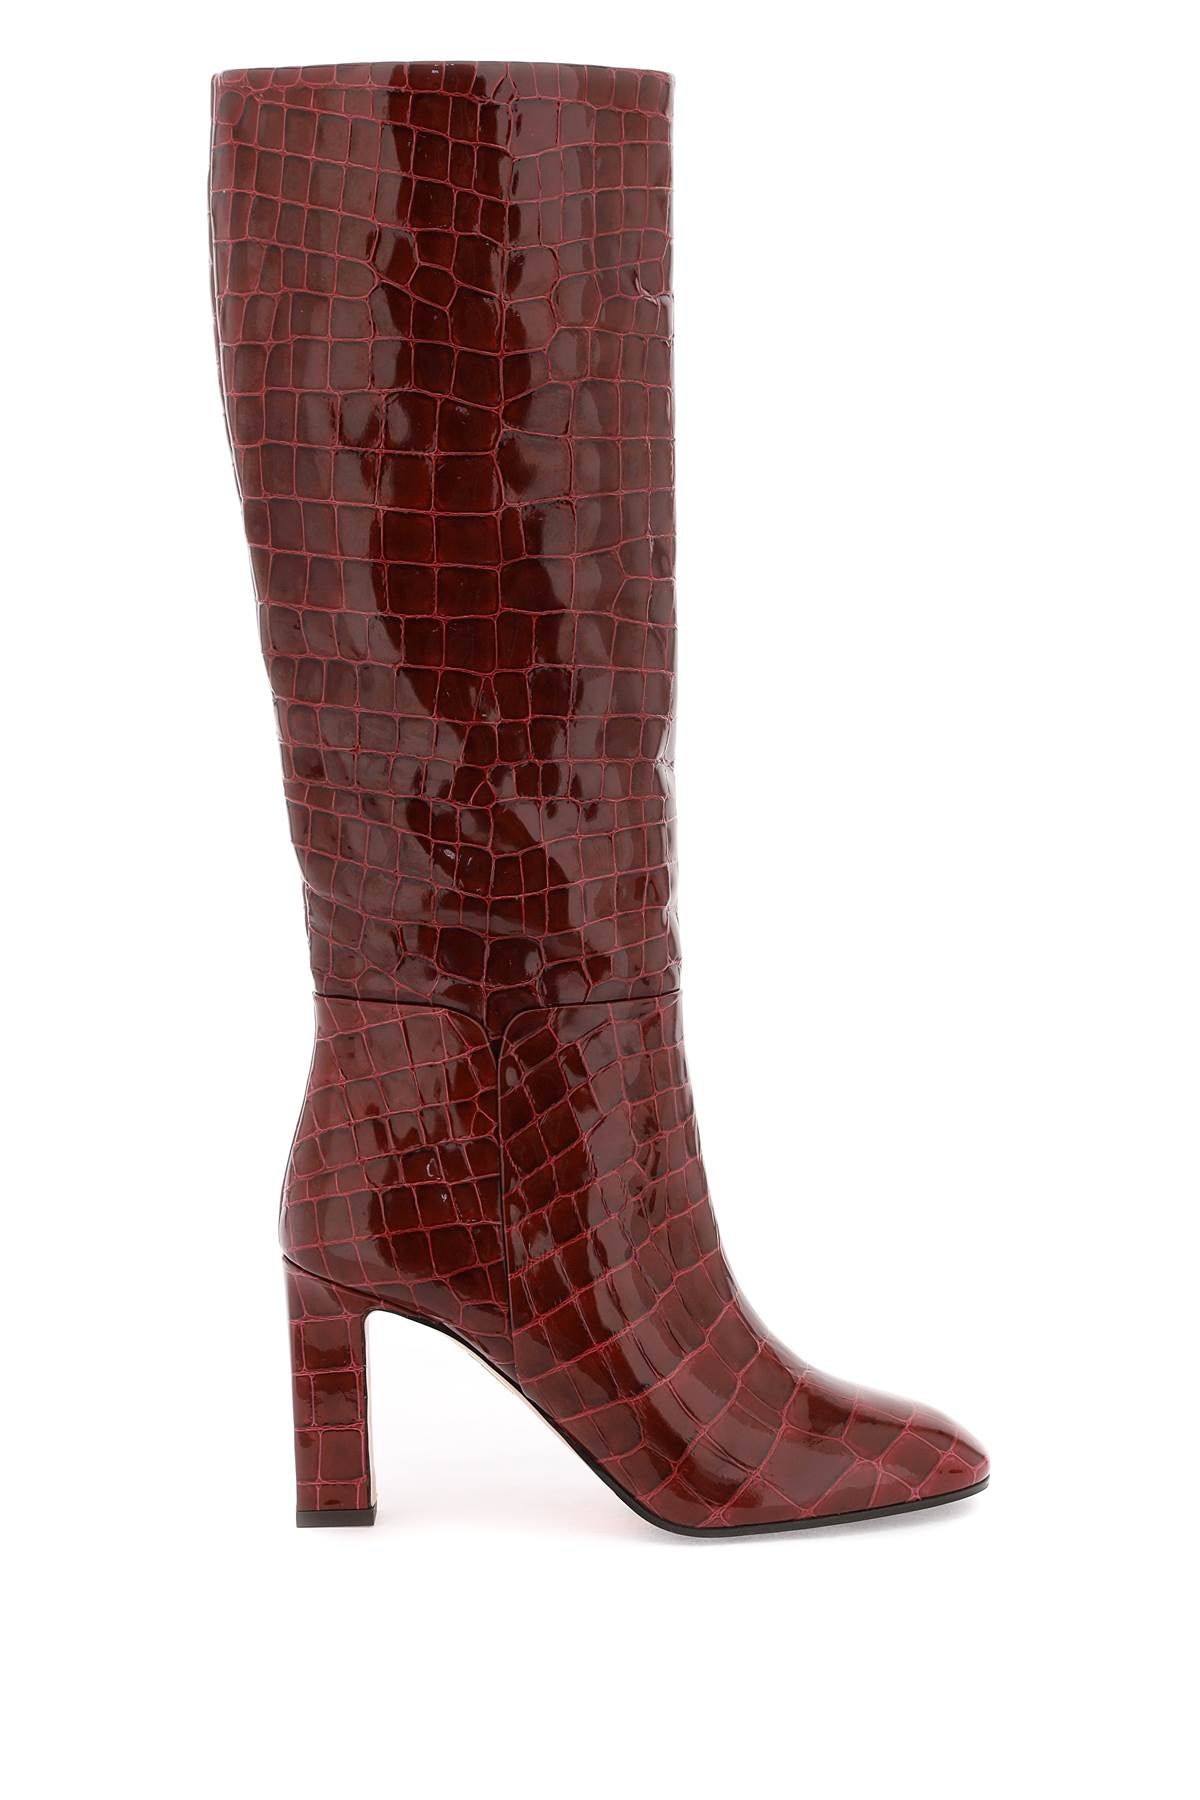 Aquazzura sellier boots in croc-embossed leather-0